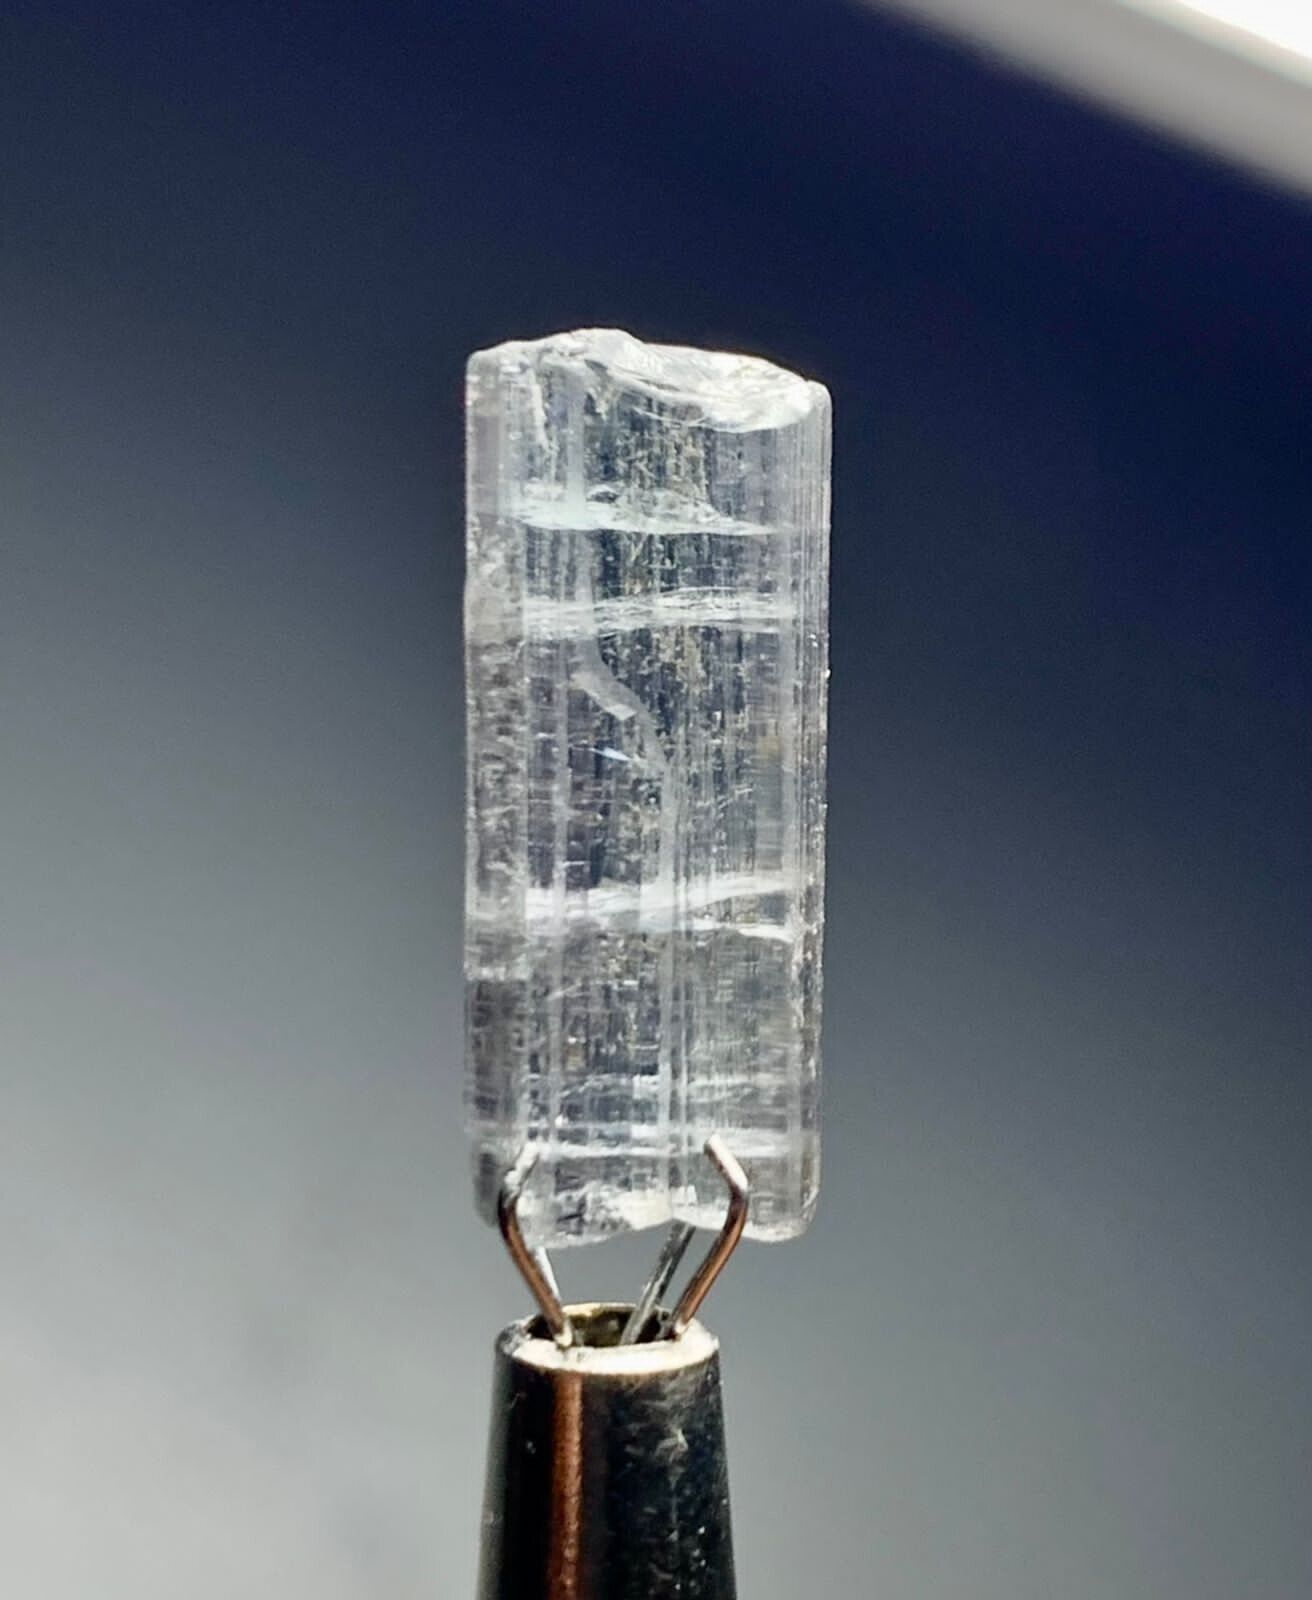 7.5 Carat beautiful terminated tourmaline crystal from Afghanistan